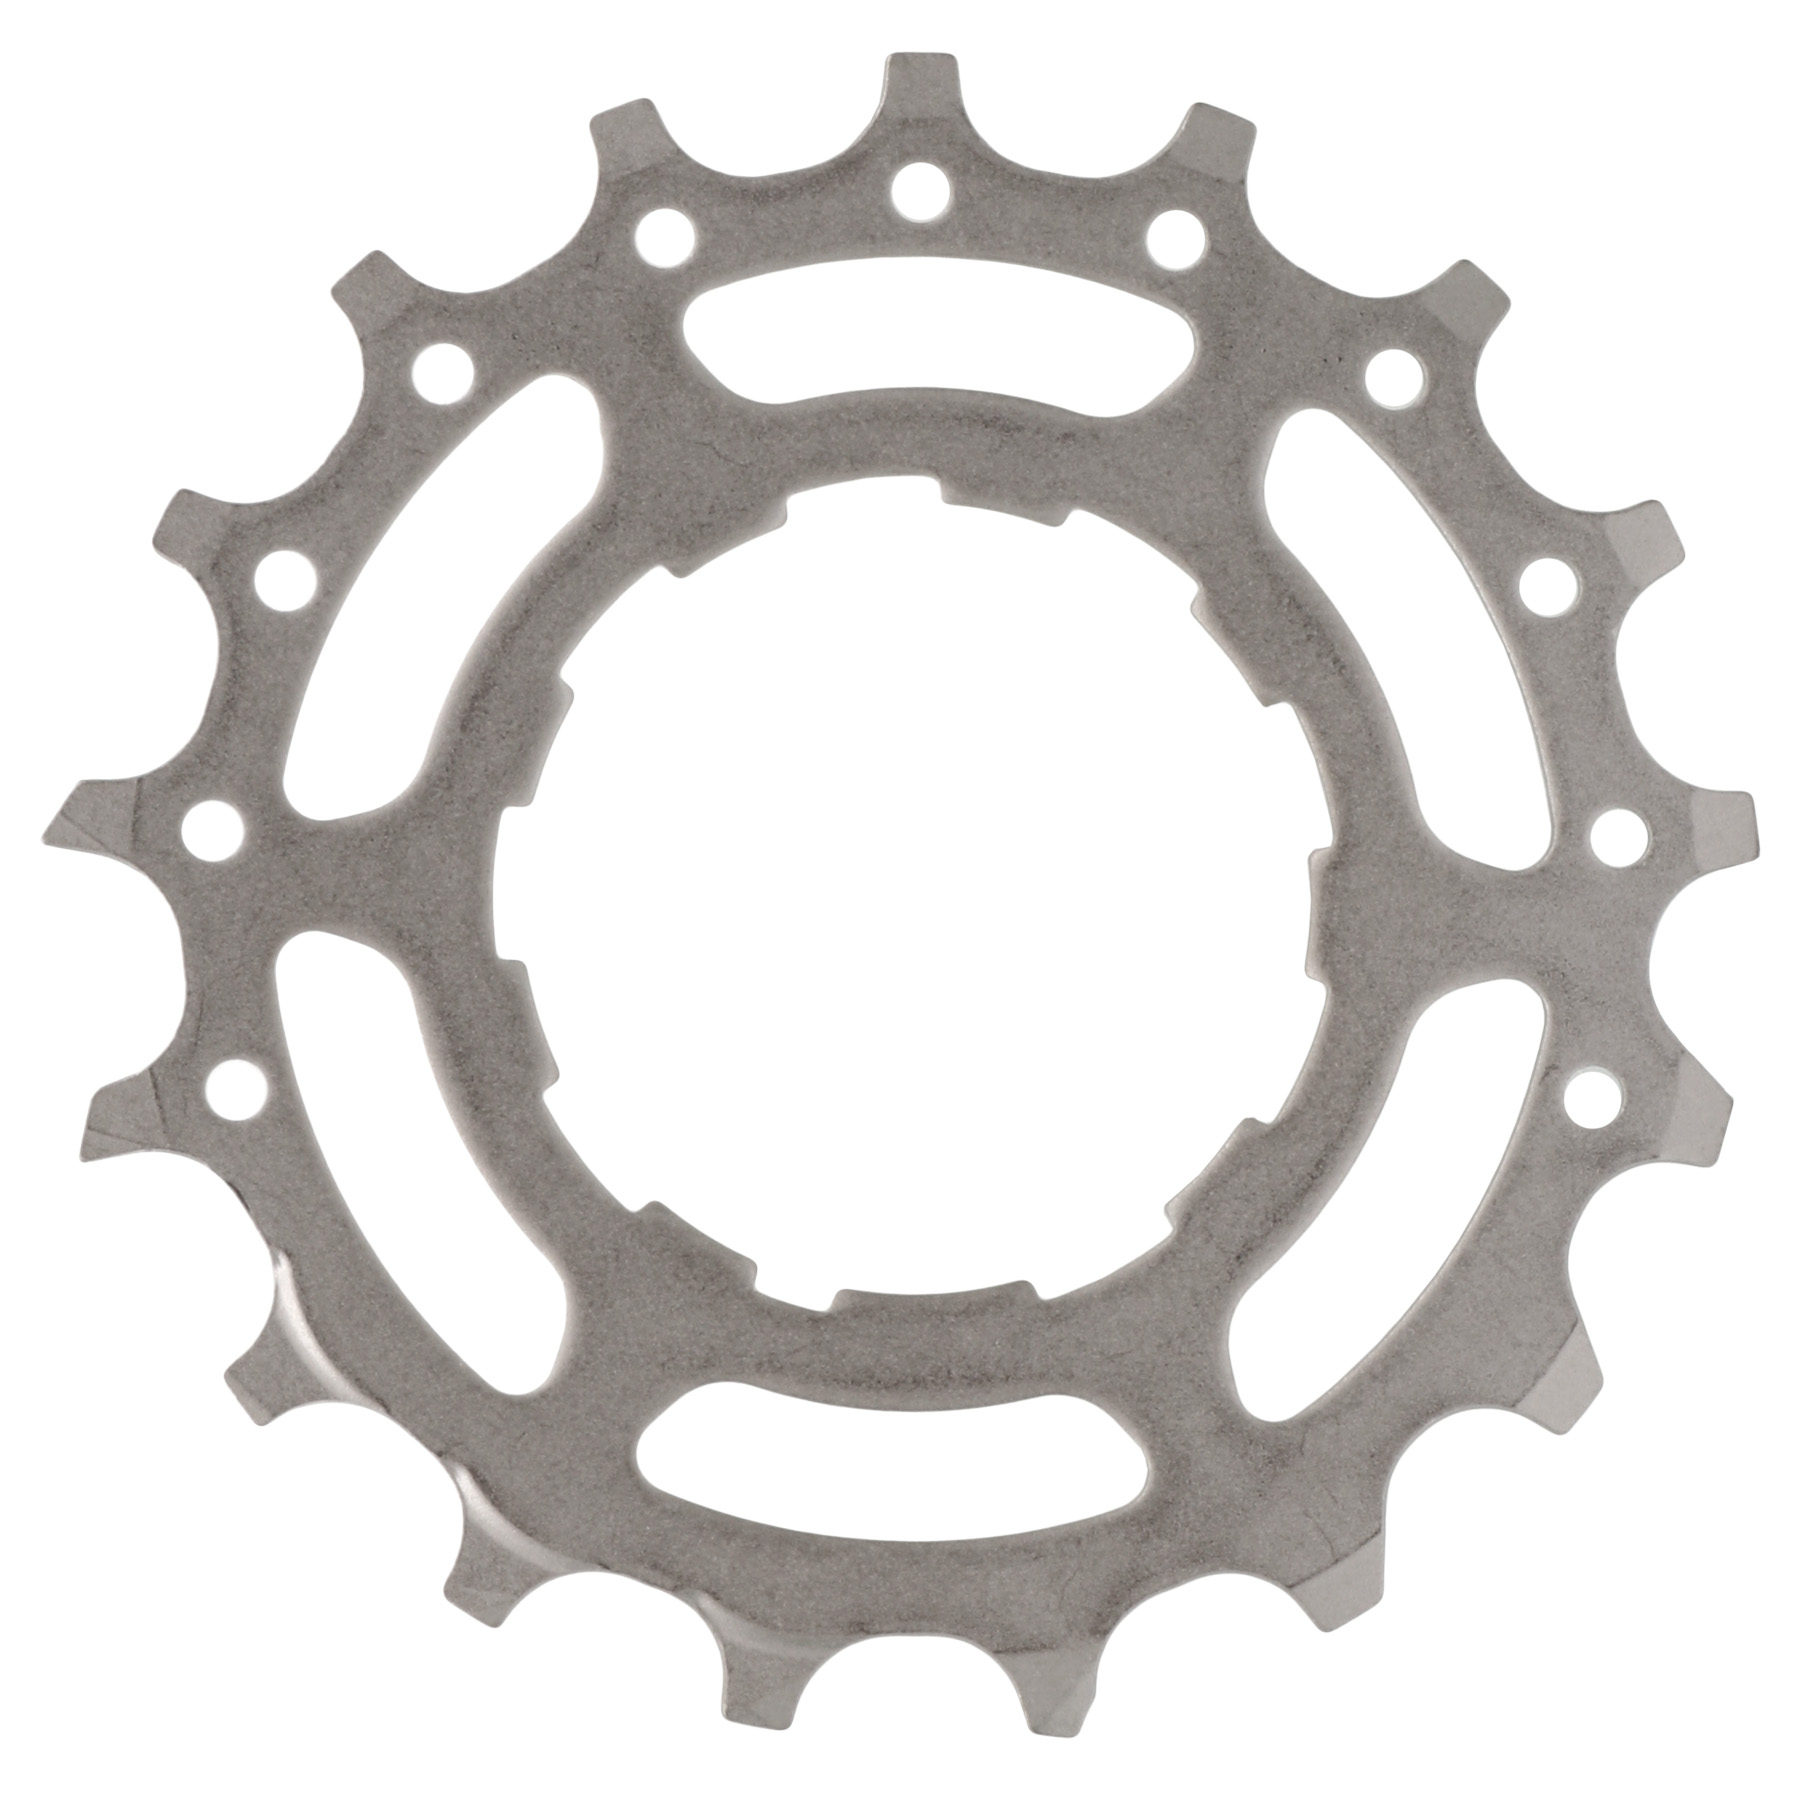 Picture of Shimano Sprocket for Dura Ace 11-Speed Cassette - 17 T for 12-25/28 (Y1YC17200) - CS-R9100 / CS-9000